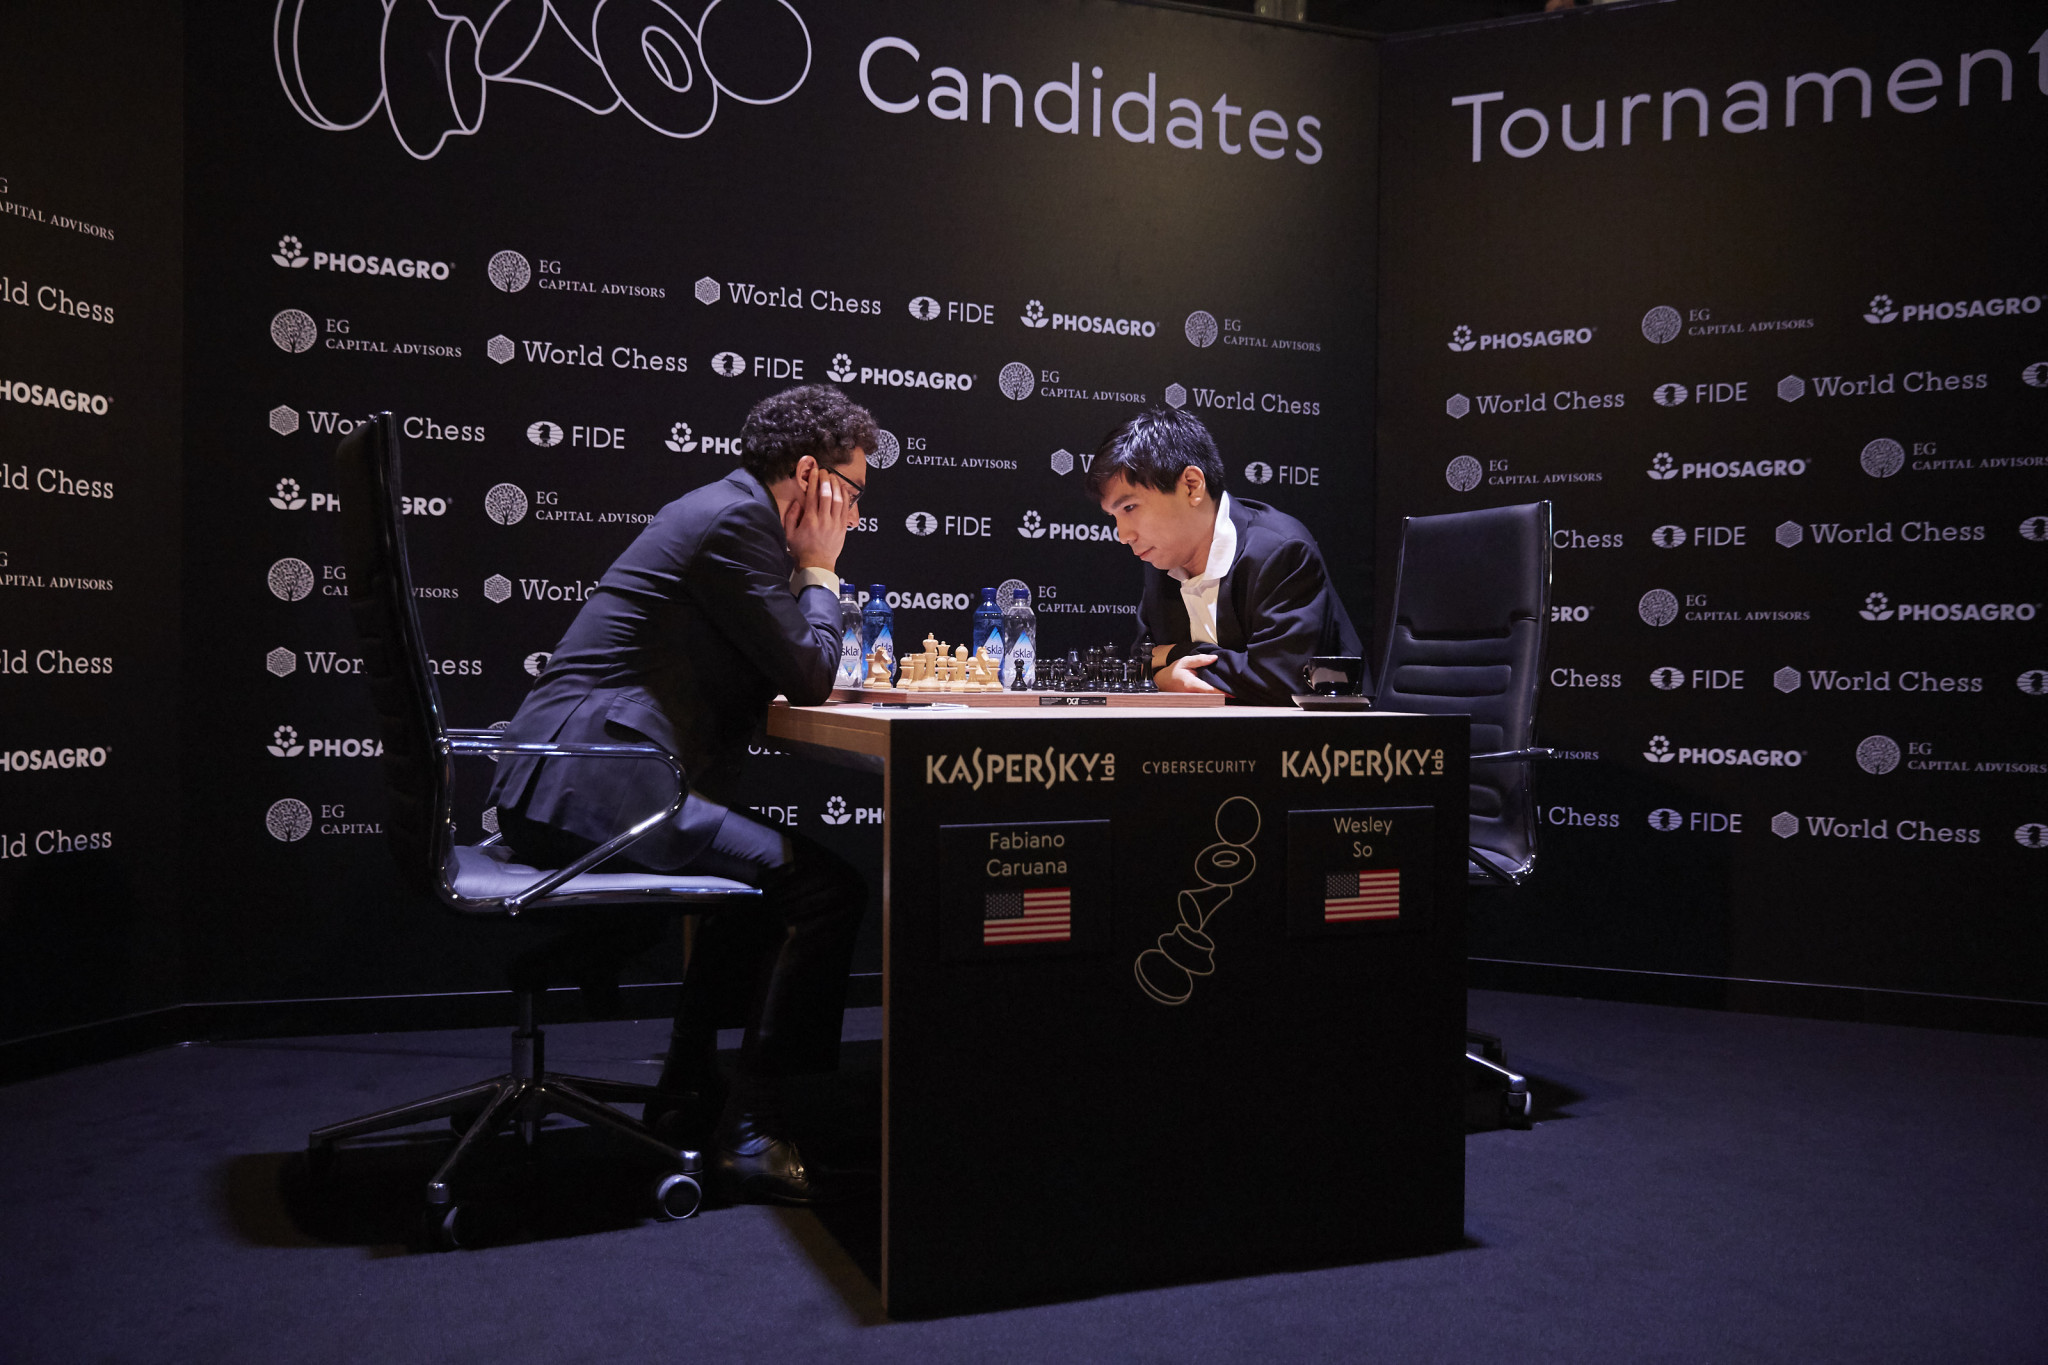 Caruana moves into top spot with win over Kramnik at FIDE Candidates Tournament 2018